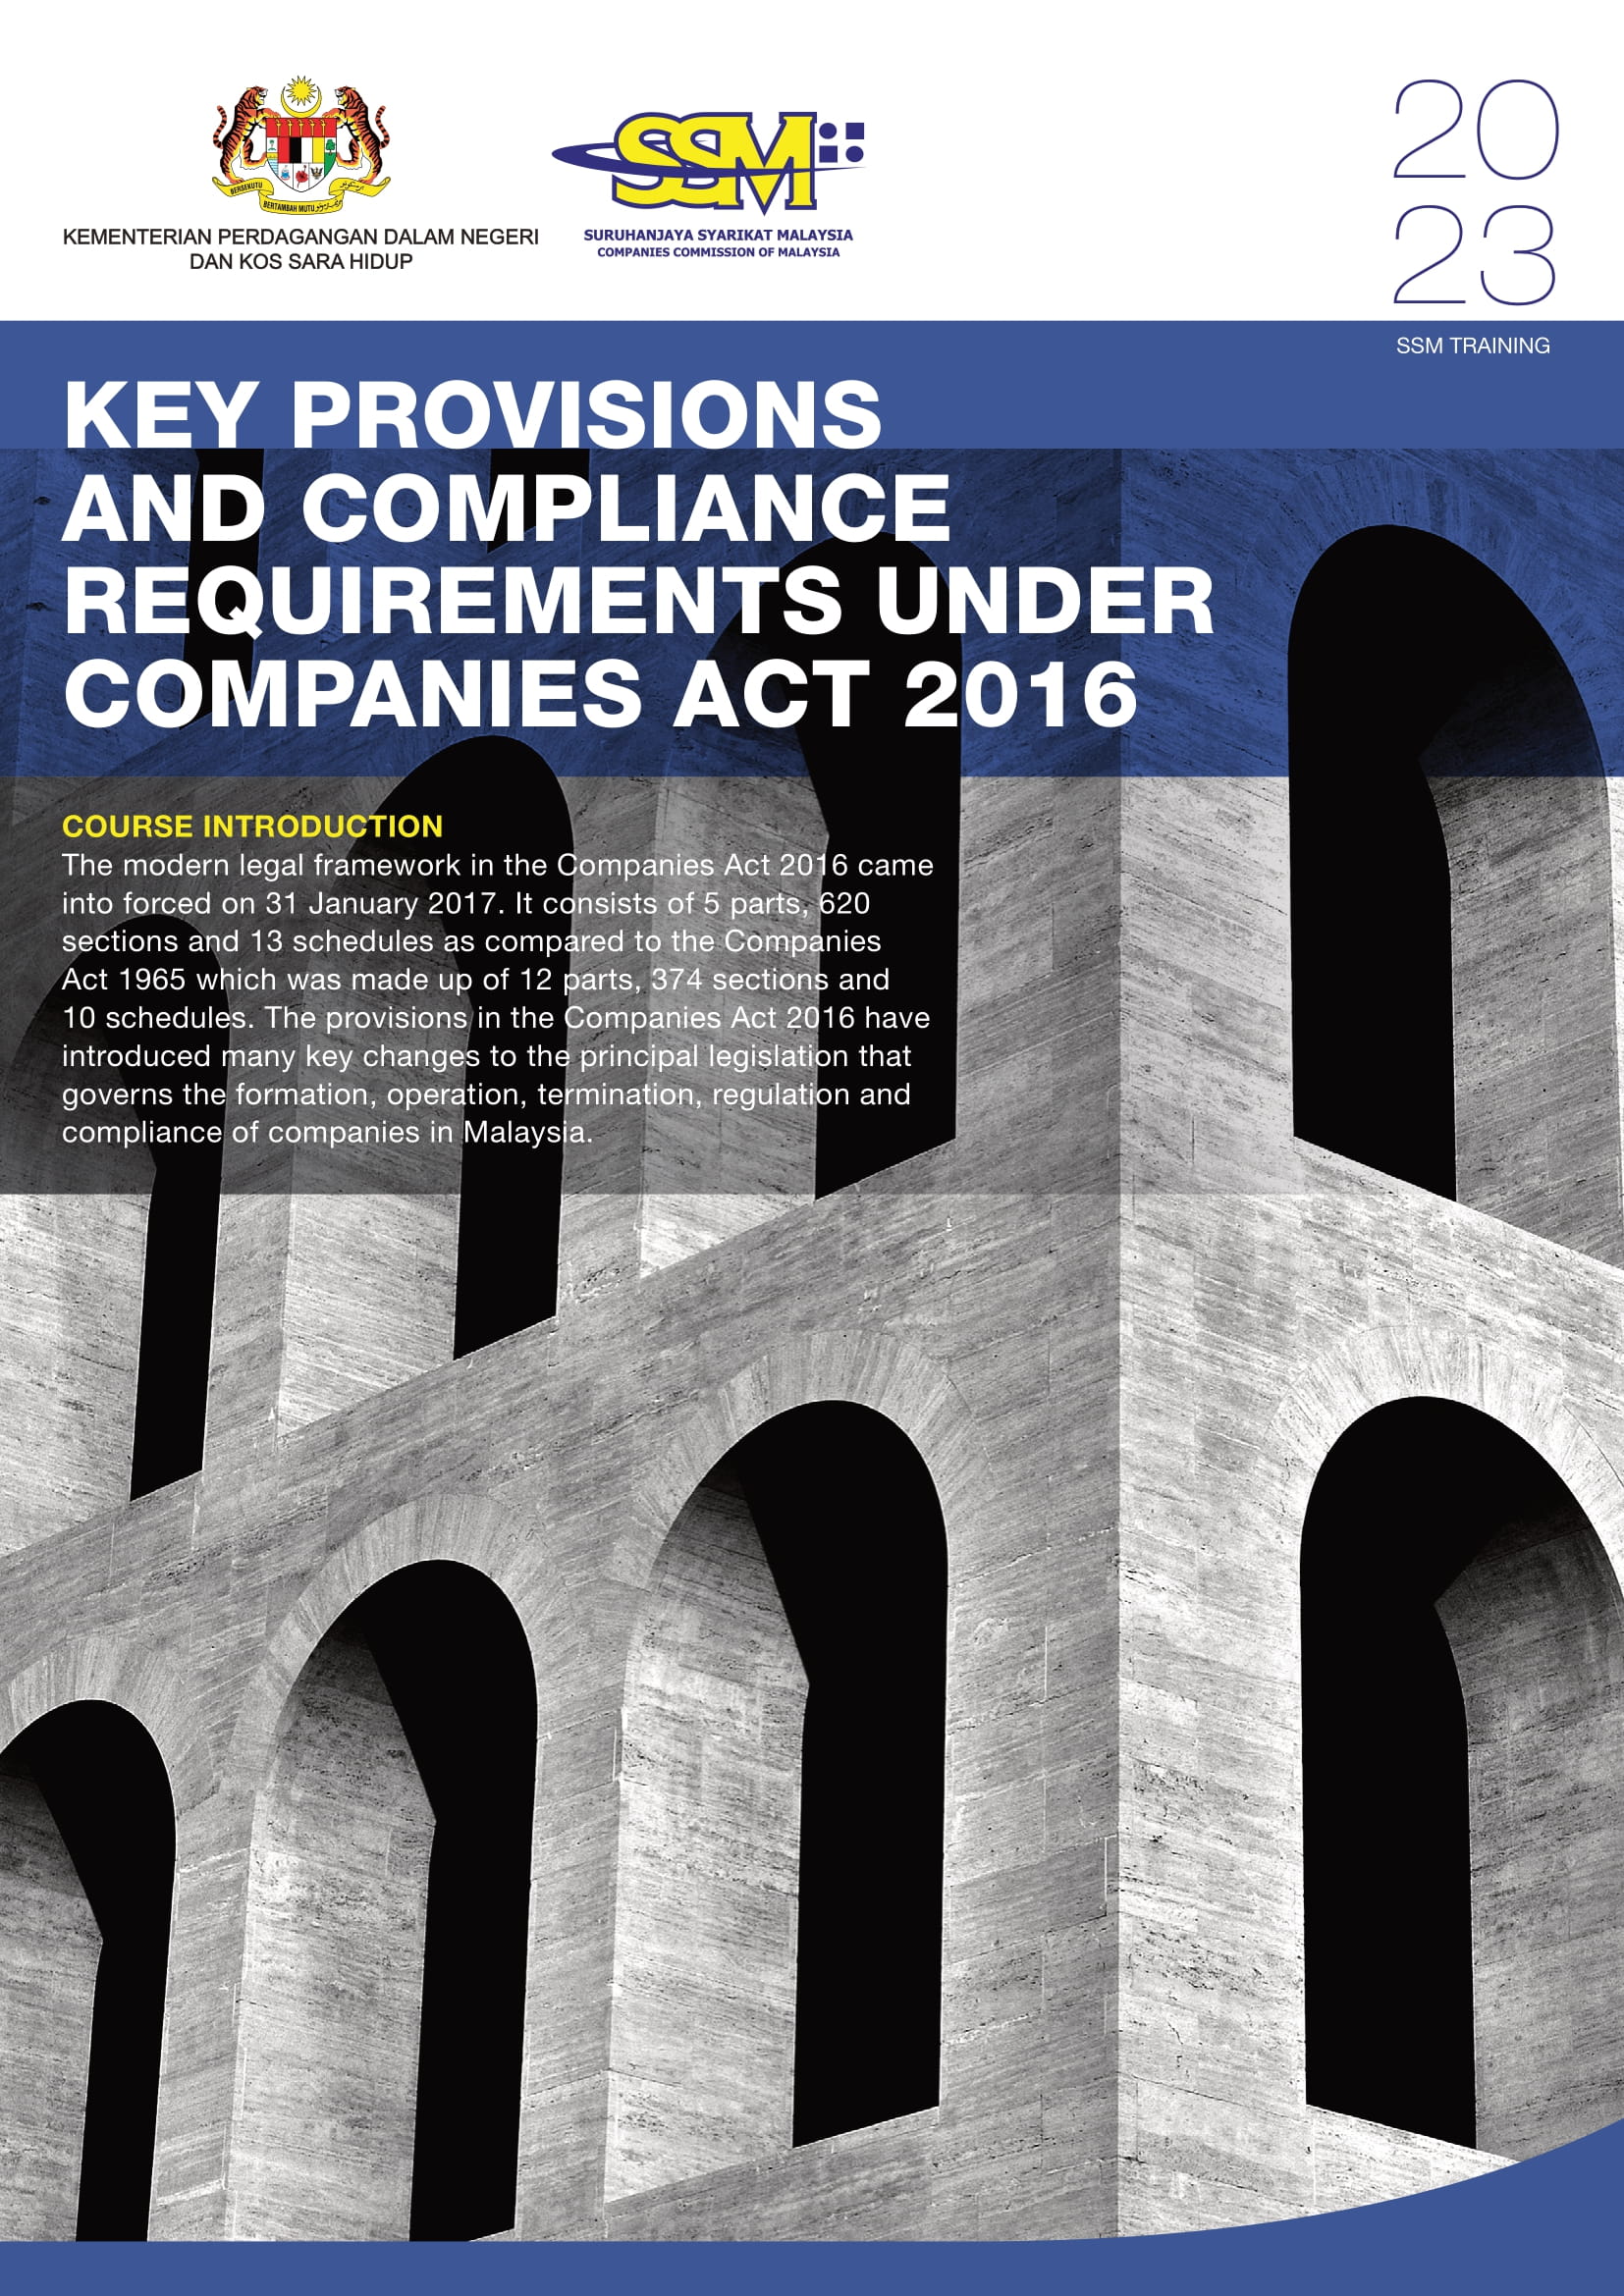 KEY PROVISIONS AND COMPLIANCE REQUIREMENTS UNDER COMPANIES ACT 2016-1.jpg